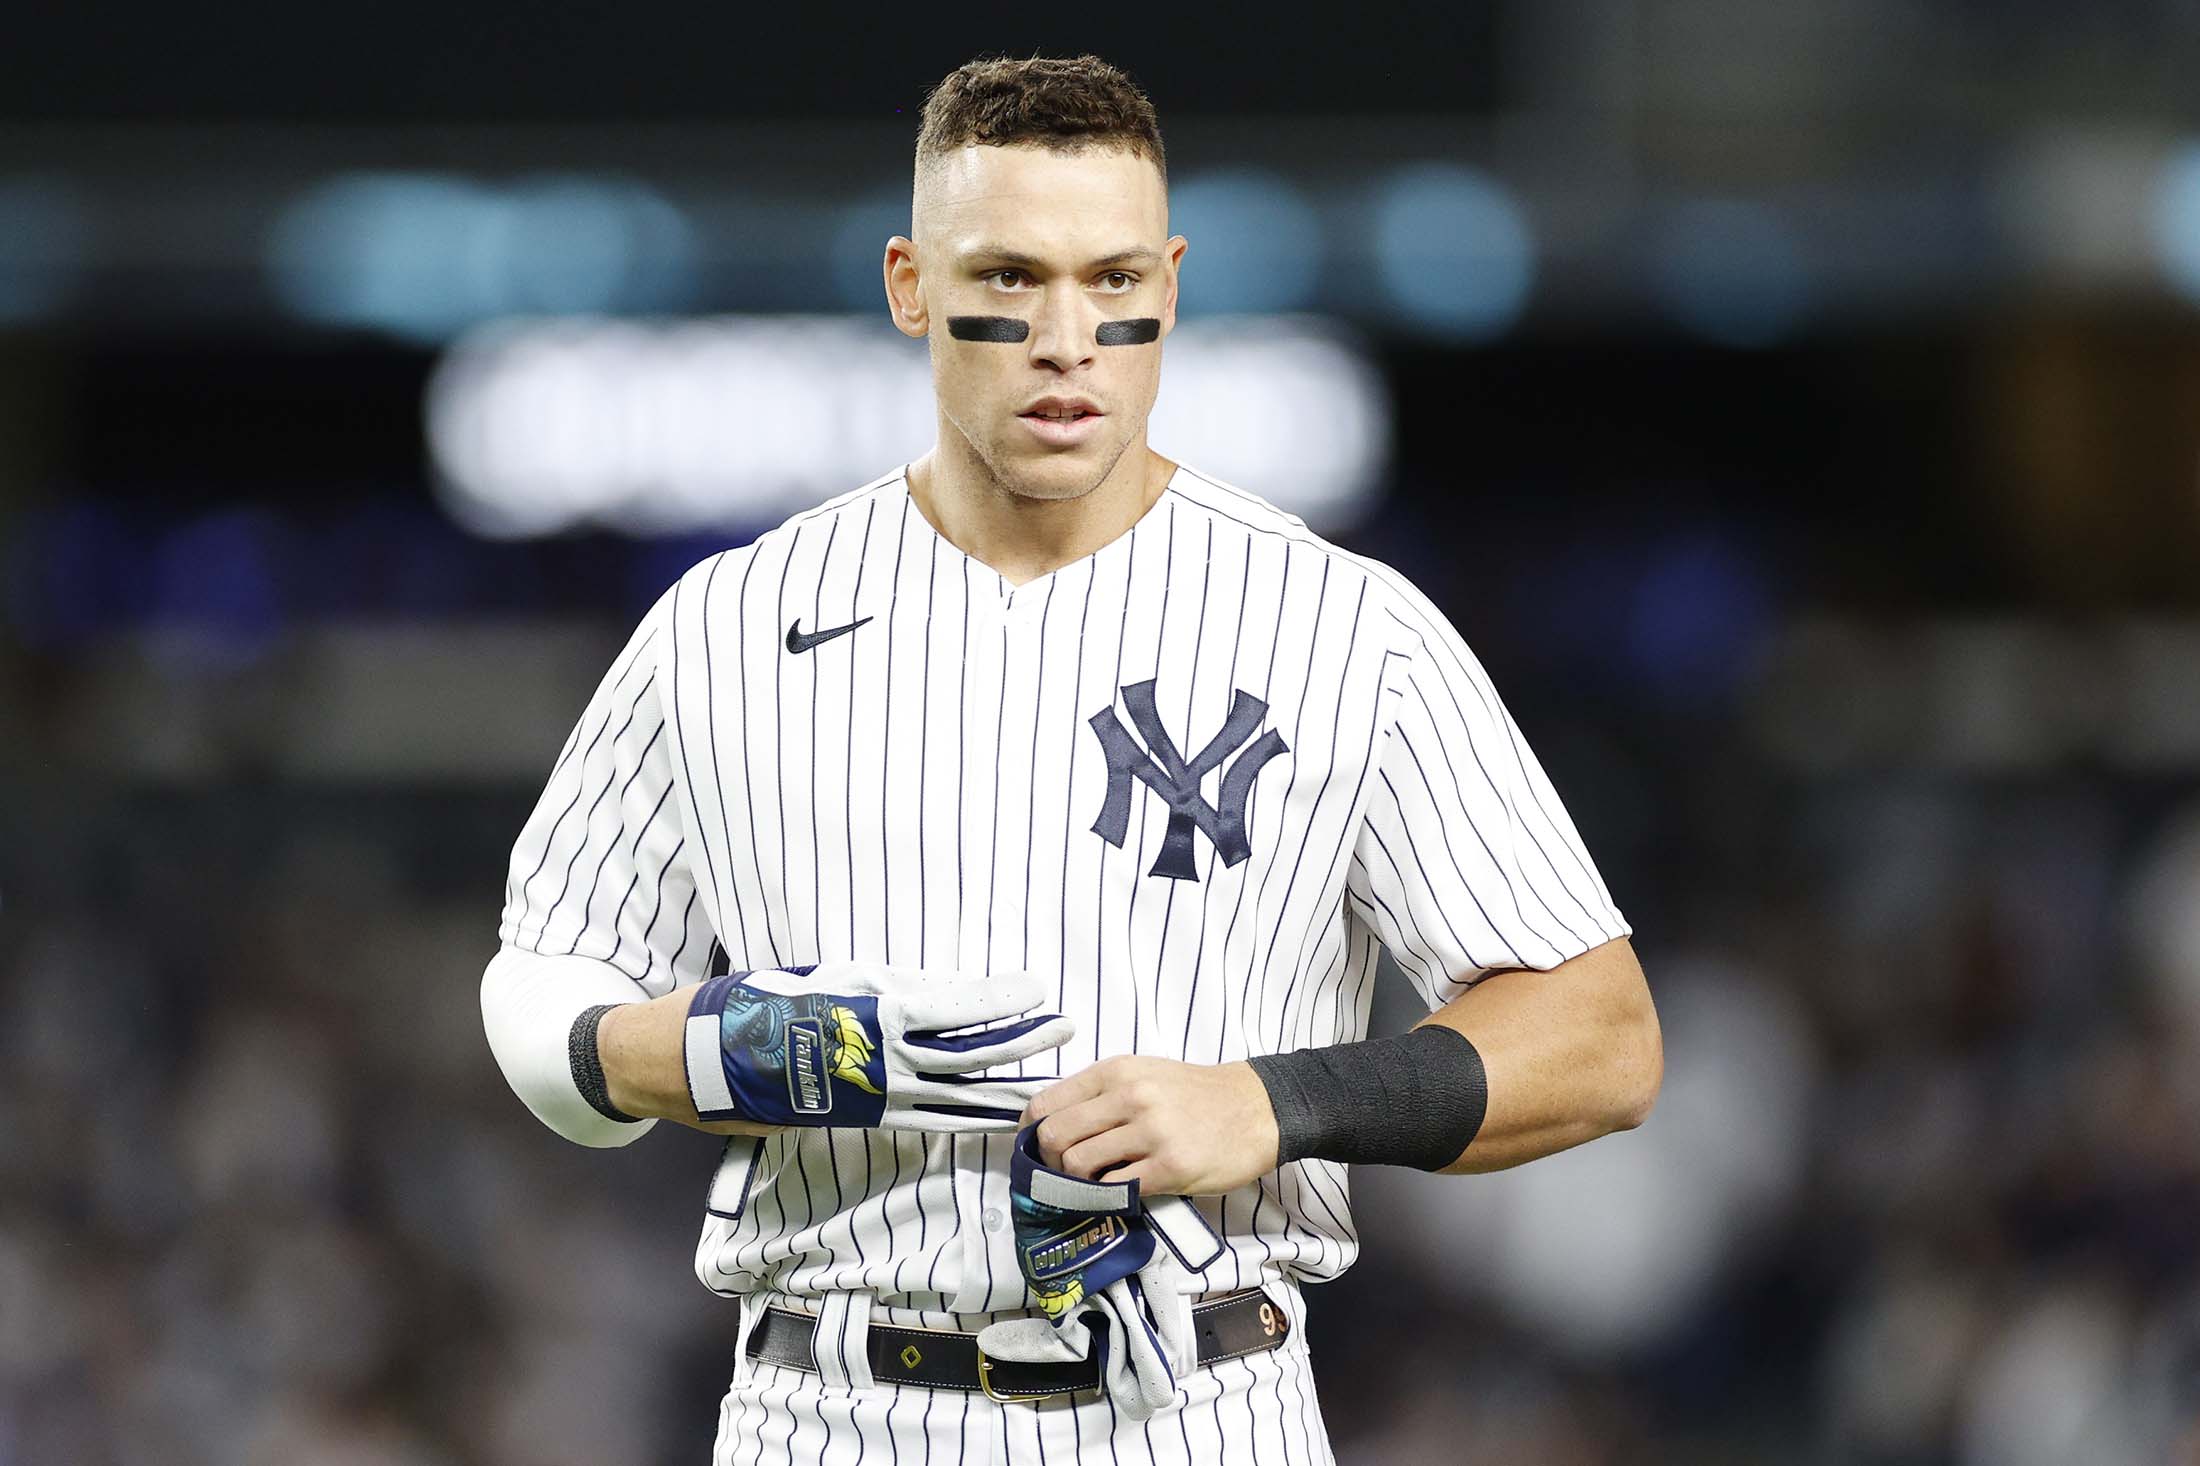 Aaron Judge has learned to make small adjustments to get big